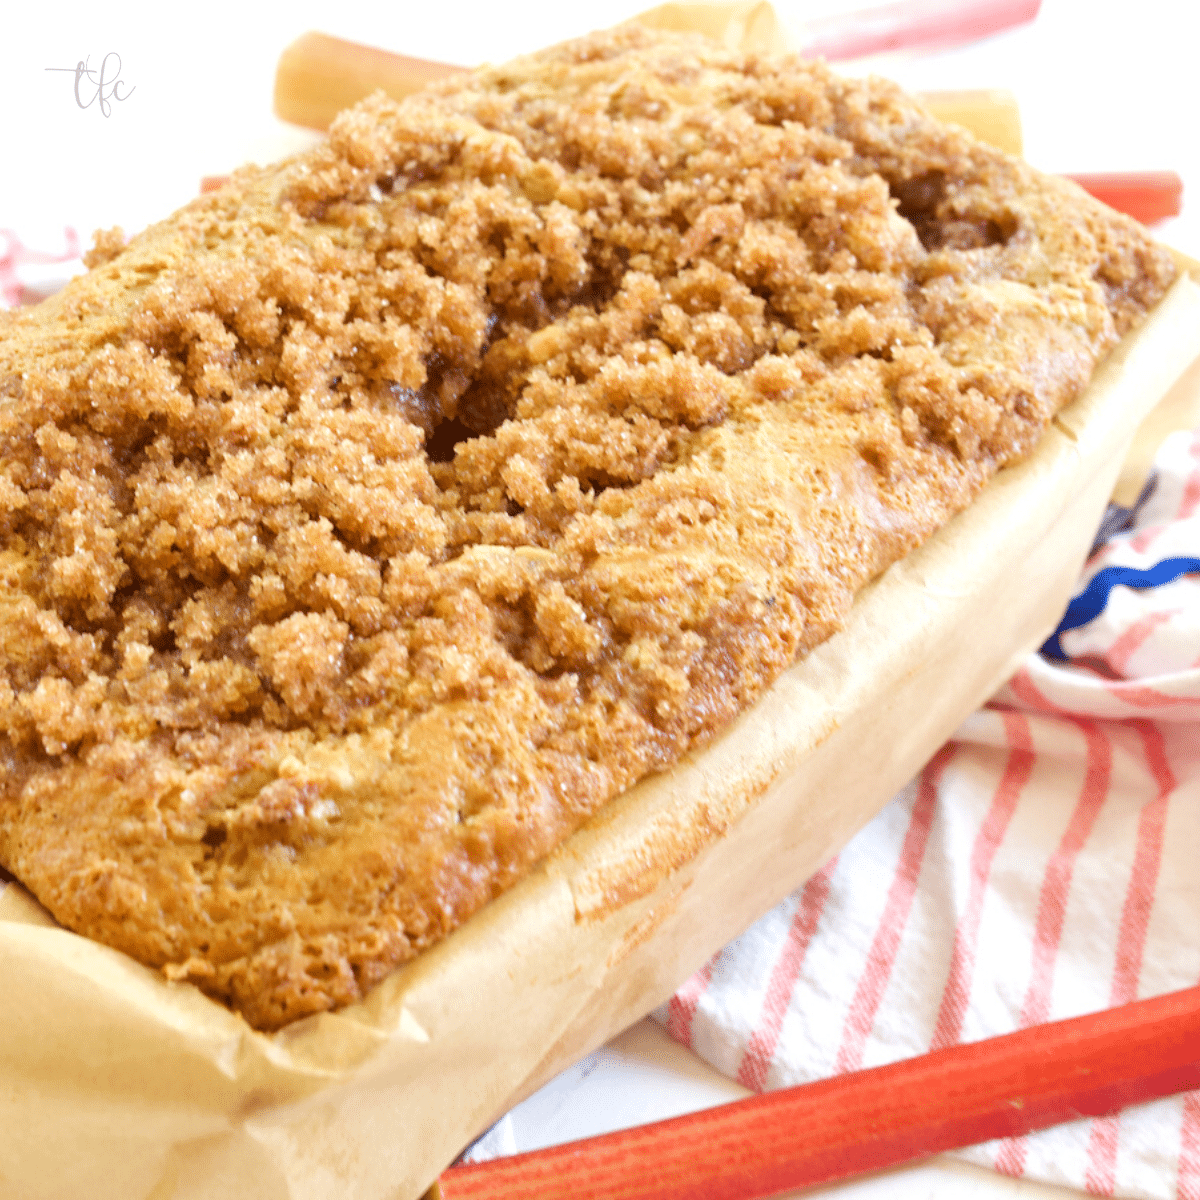 Buttermilk rhubarb bread in loaf pan with cinnamon streusel topping.